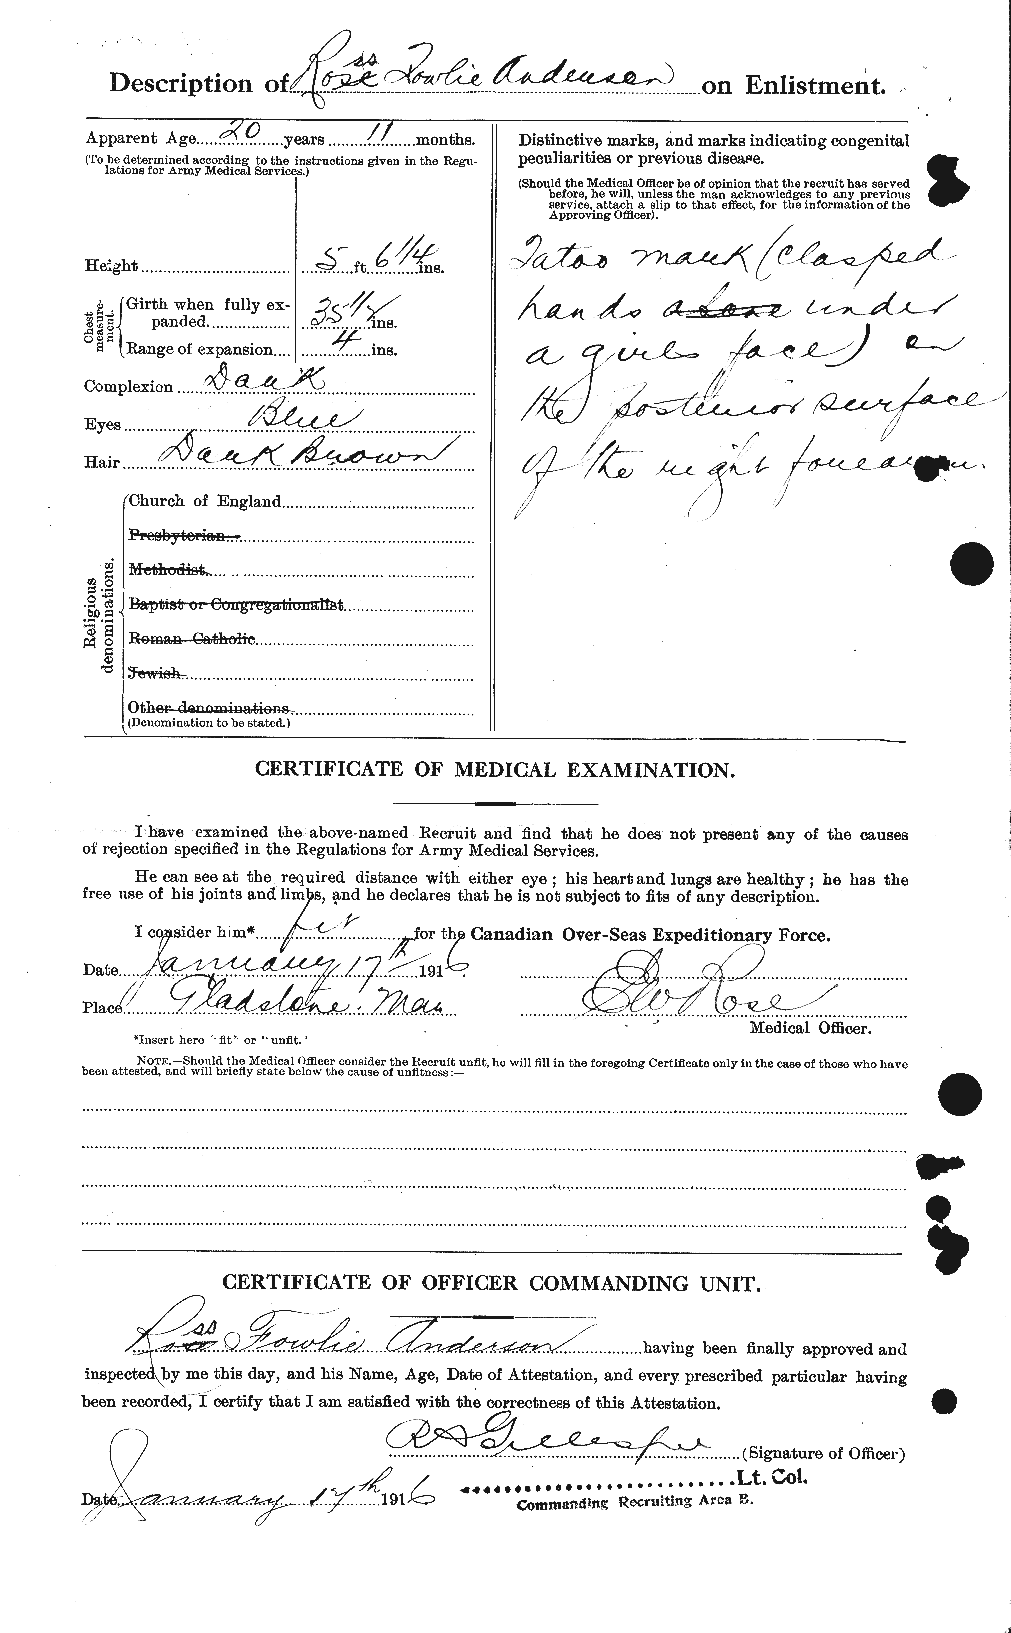 Personnel Records of the First World War - CEF 207207b